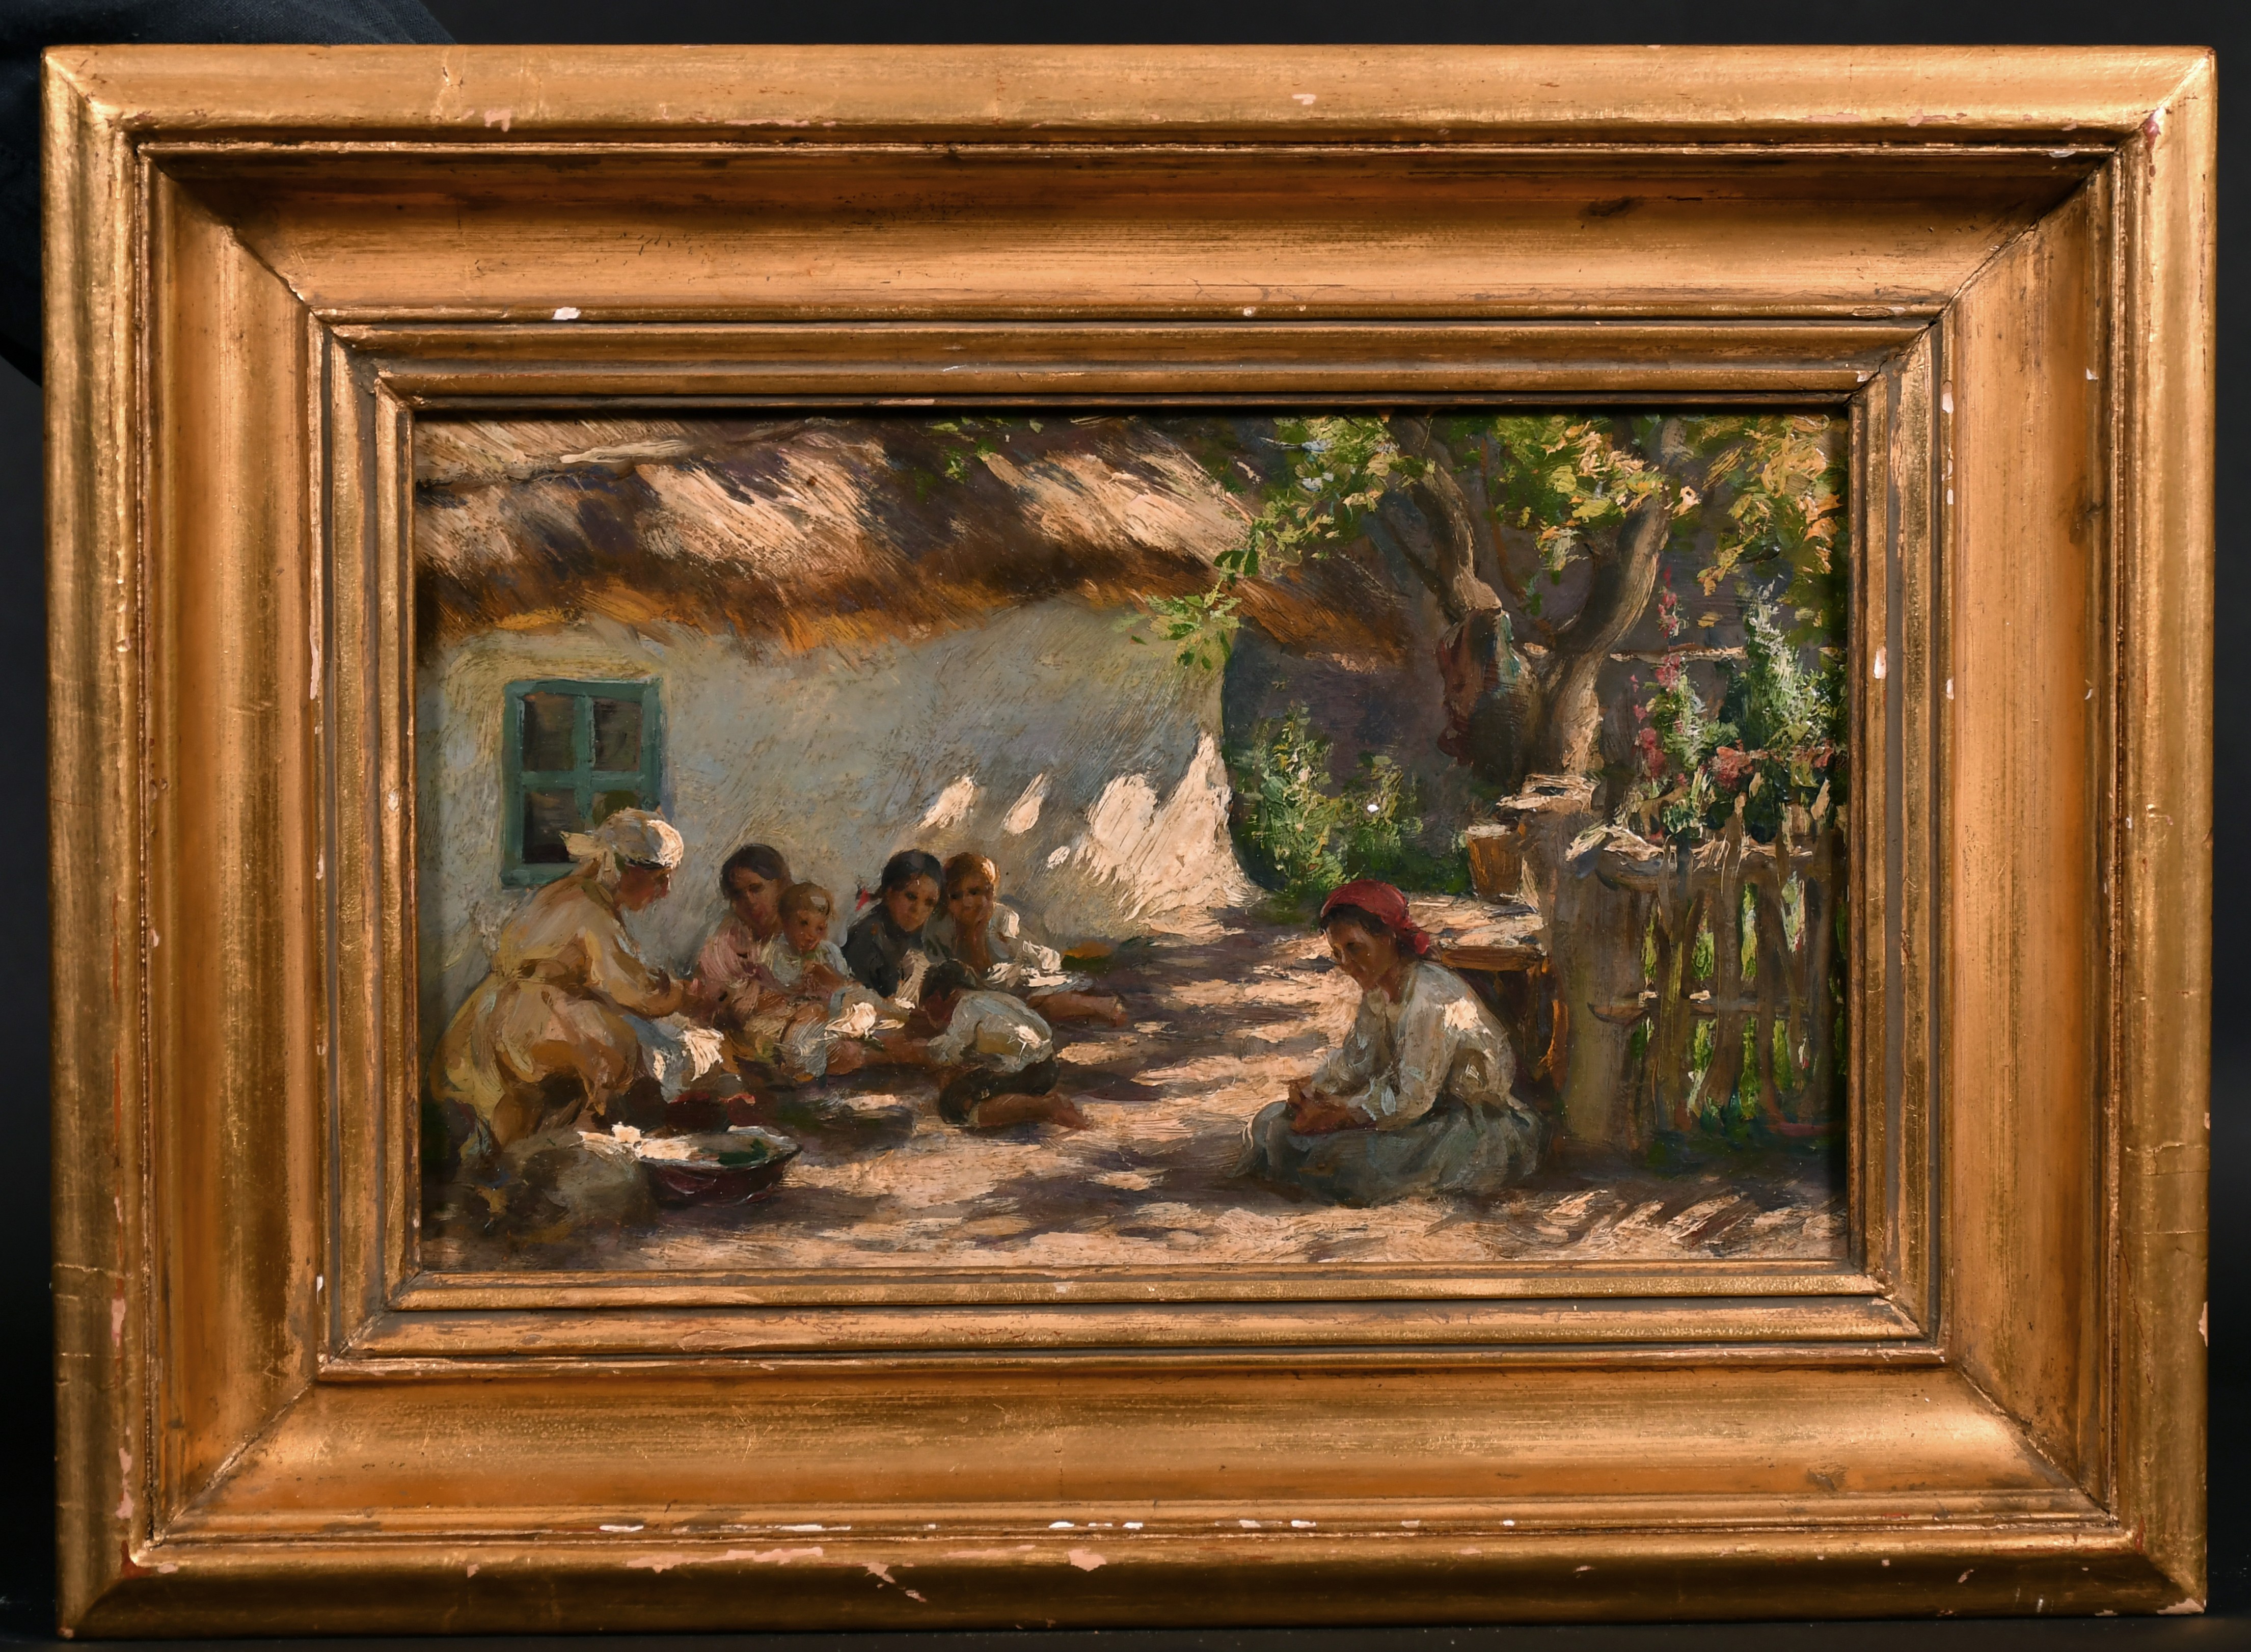 Nicholai Vasilievich Kharitonov (1880-1944) Russian. Figures in the Shade by a Hut, Oil on Board, - Image 2 of 4